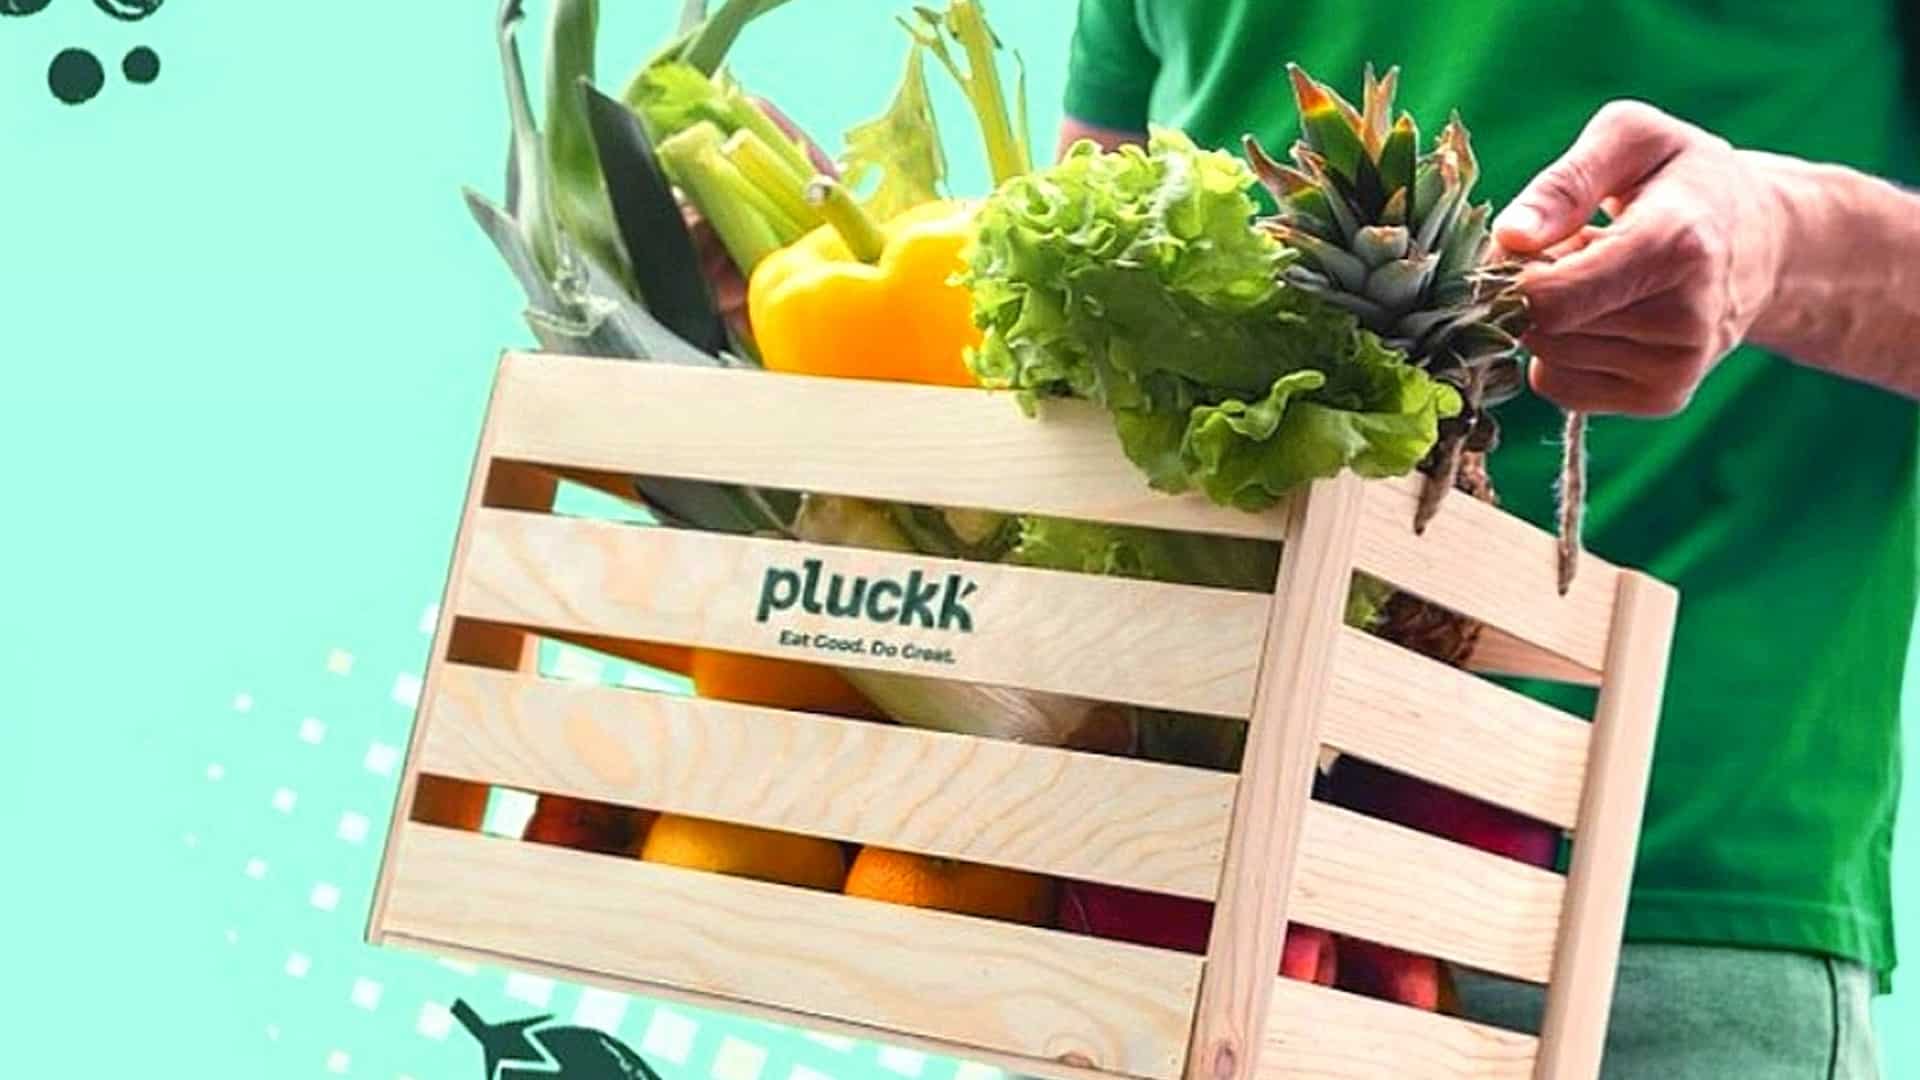 Food-tech start-up Pluckk acquires 100 pc stake in meal kit brand KOOK